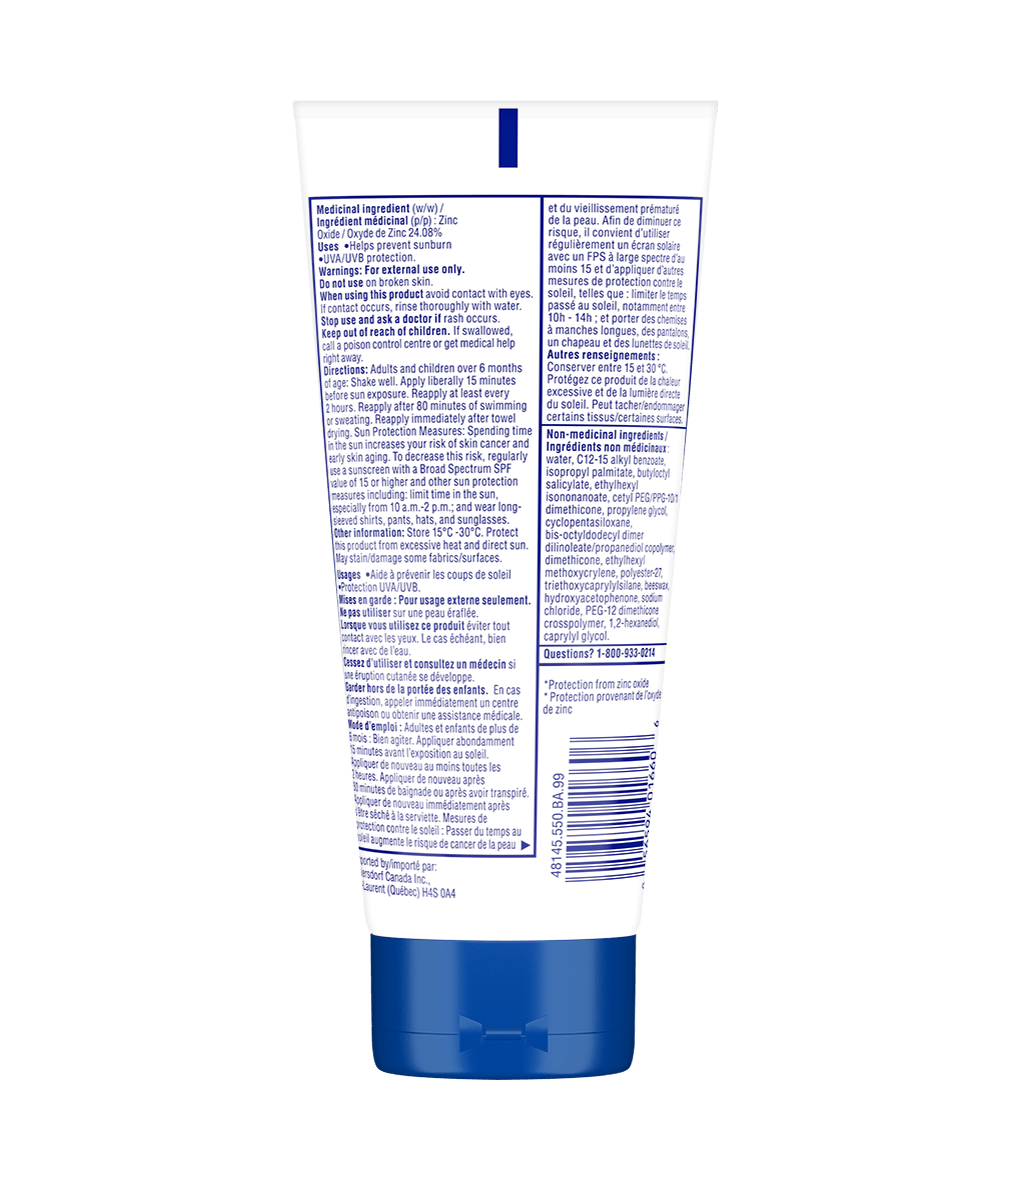 Sport Mineral Lotion SPF50